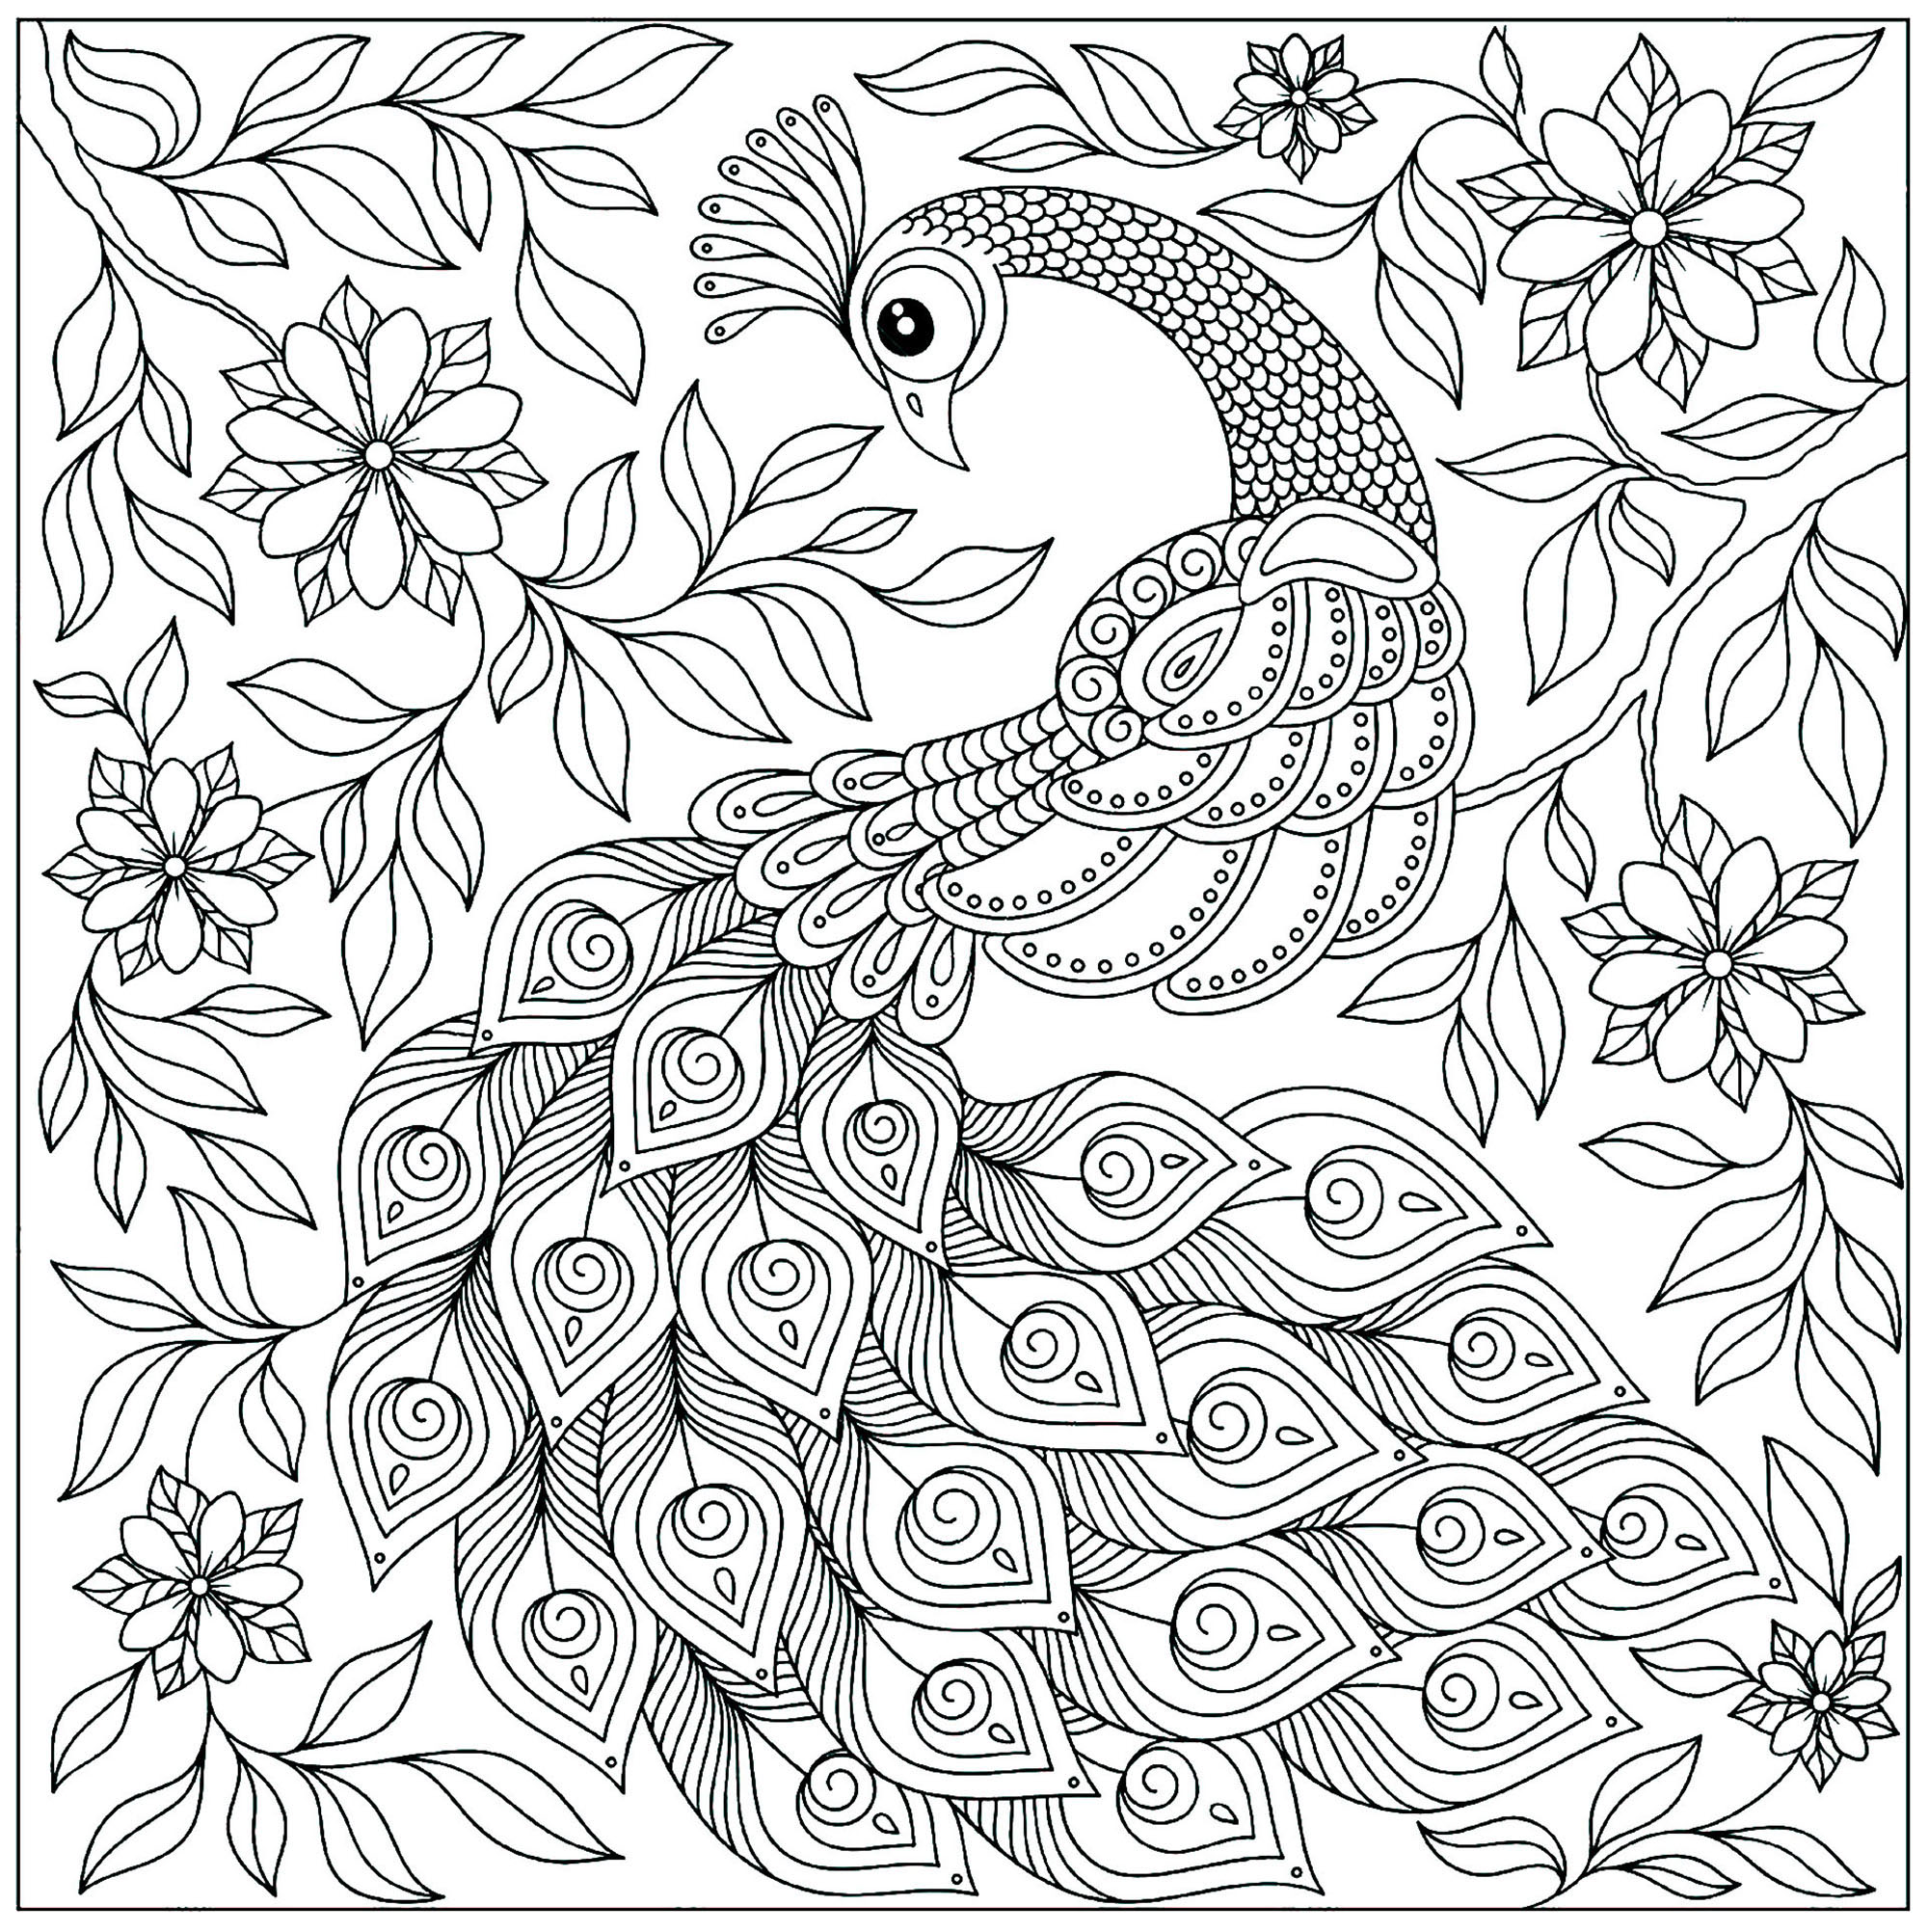 New Coloring Pages On Coloring Book with simple drawing